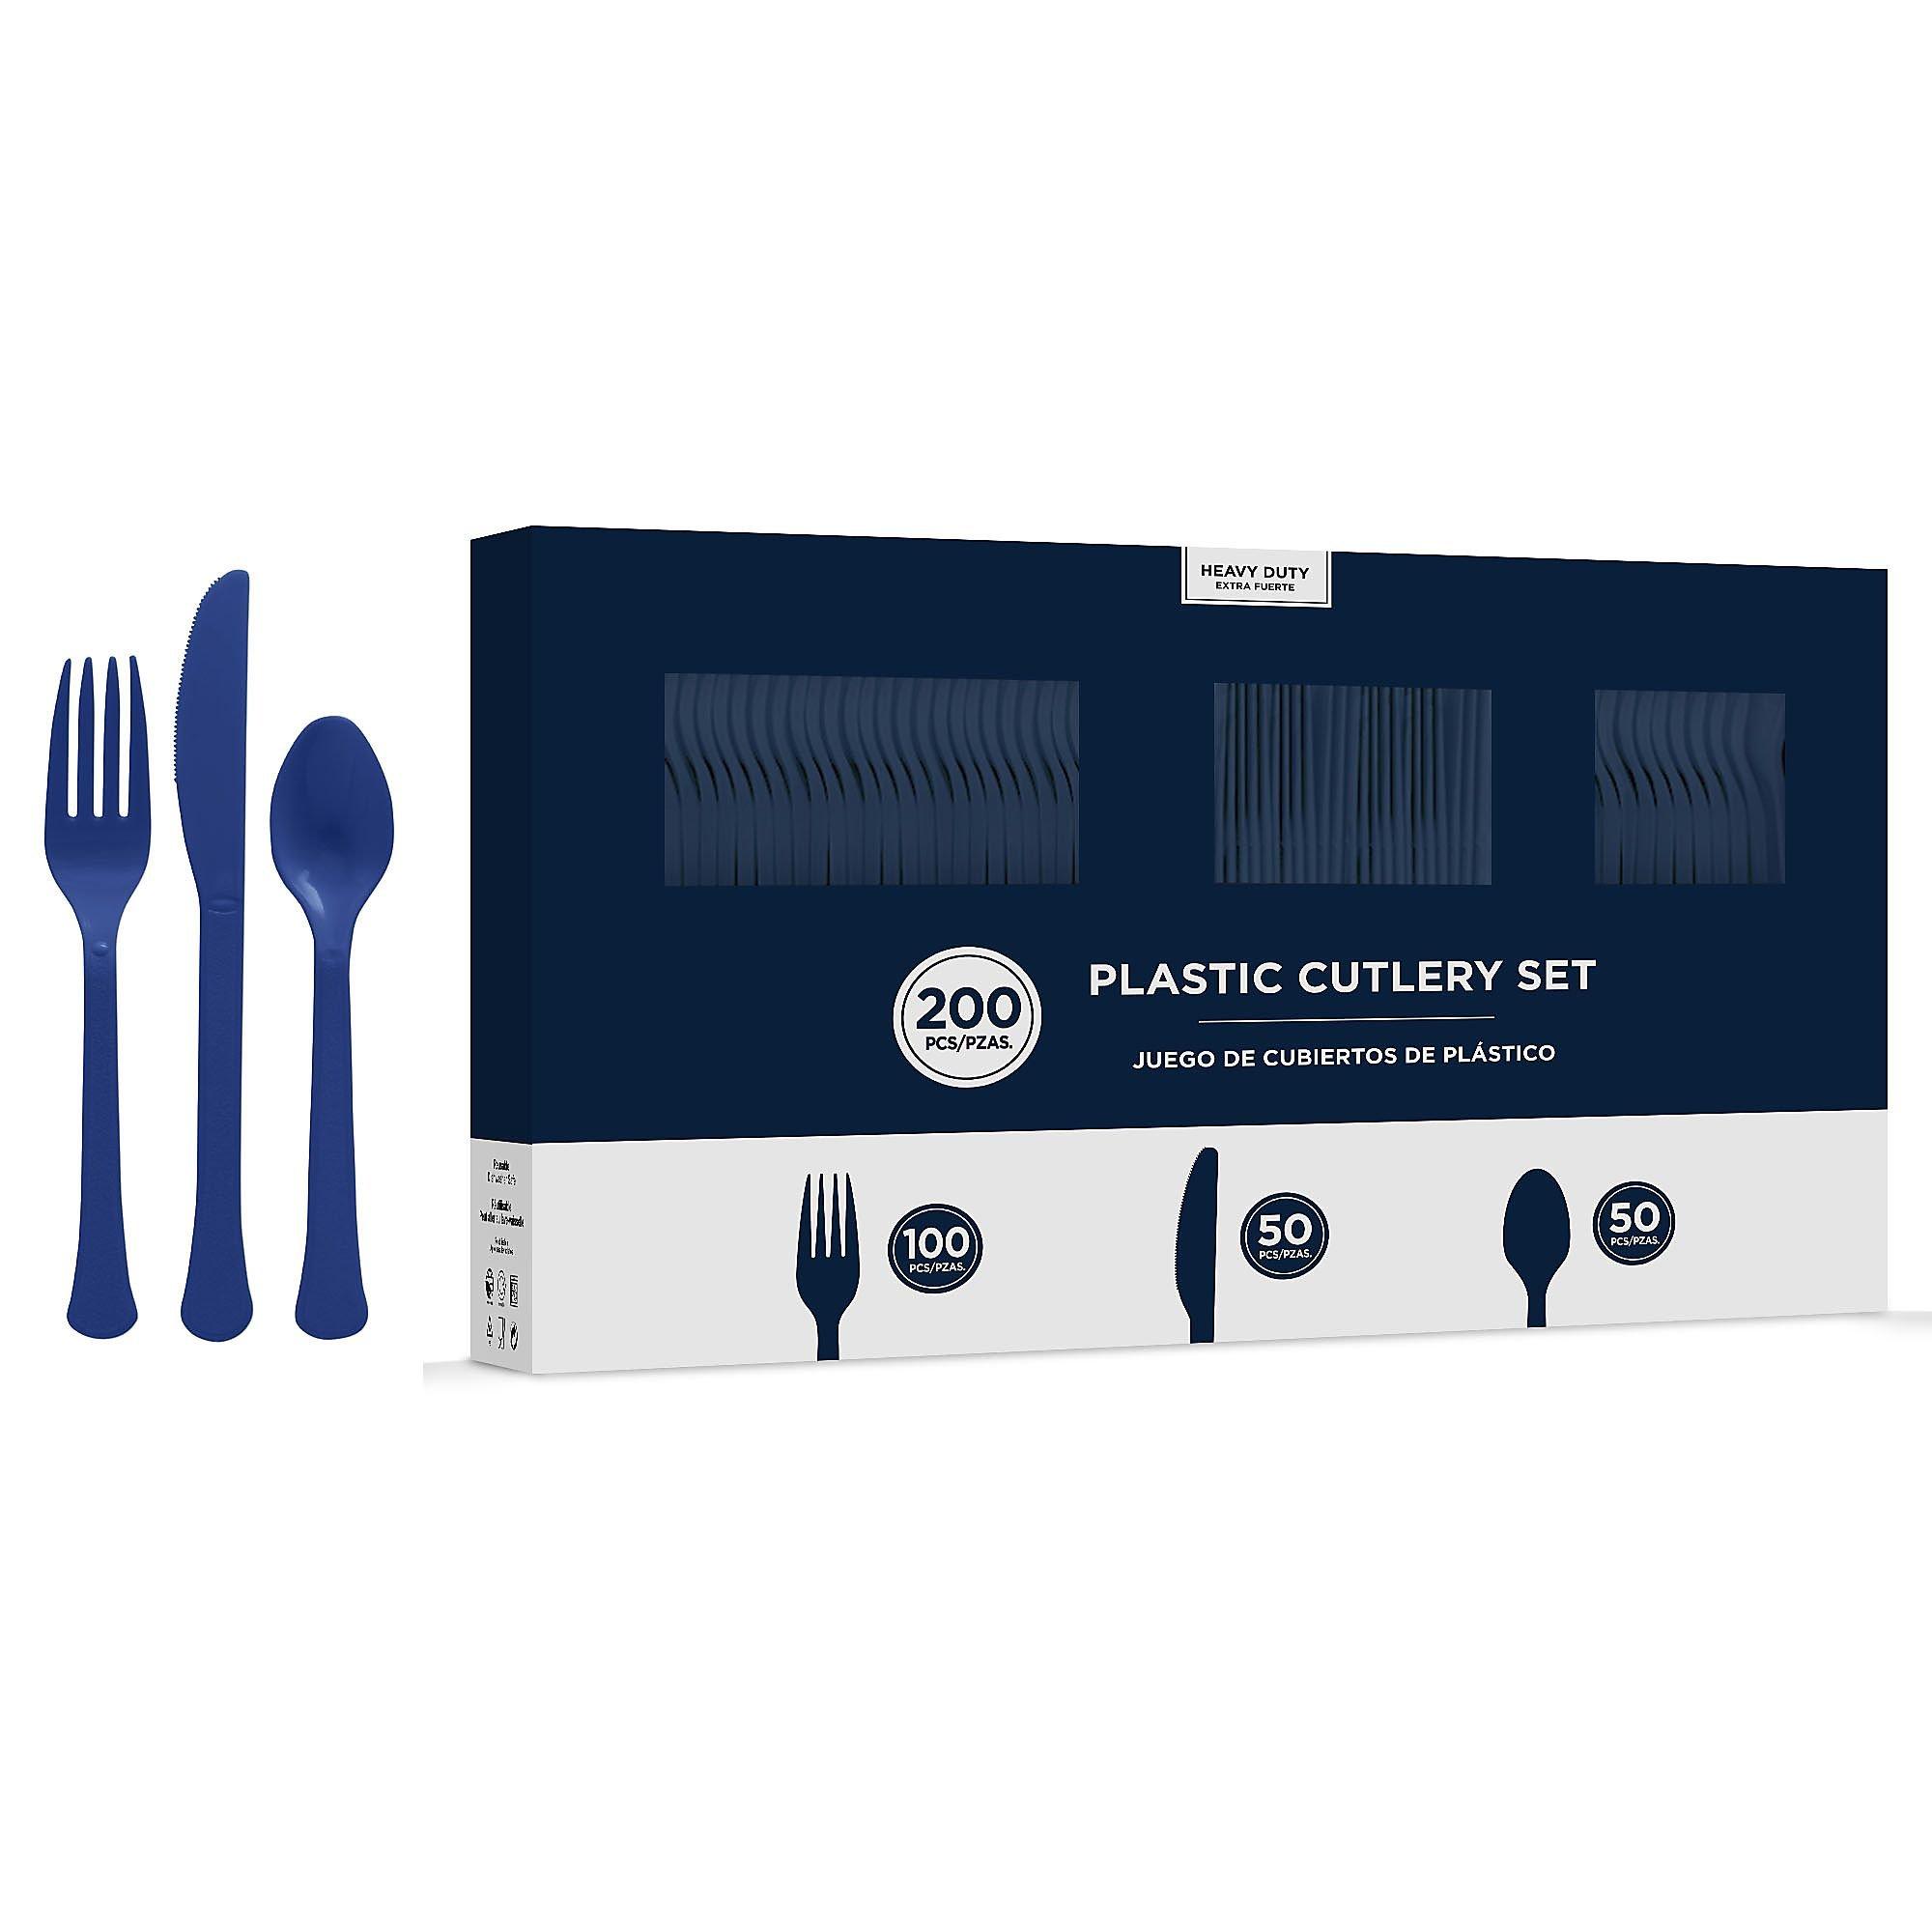 True Navy Blue Heavy-Duty Plastic Cutlery Set for 50 Guests, 200ct